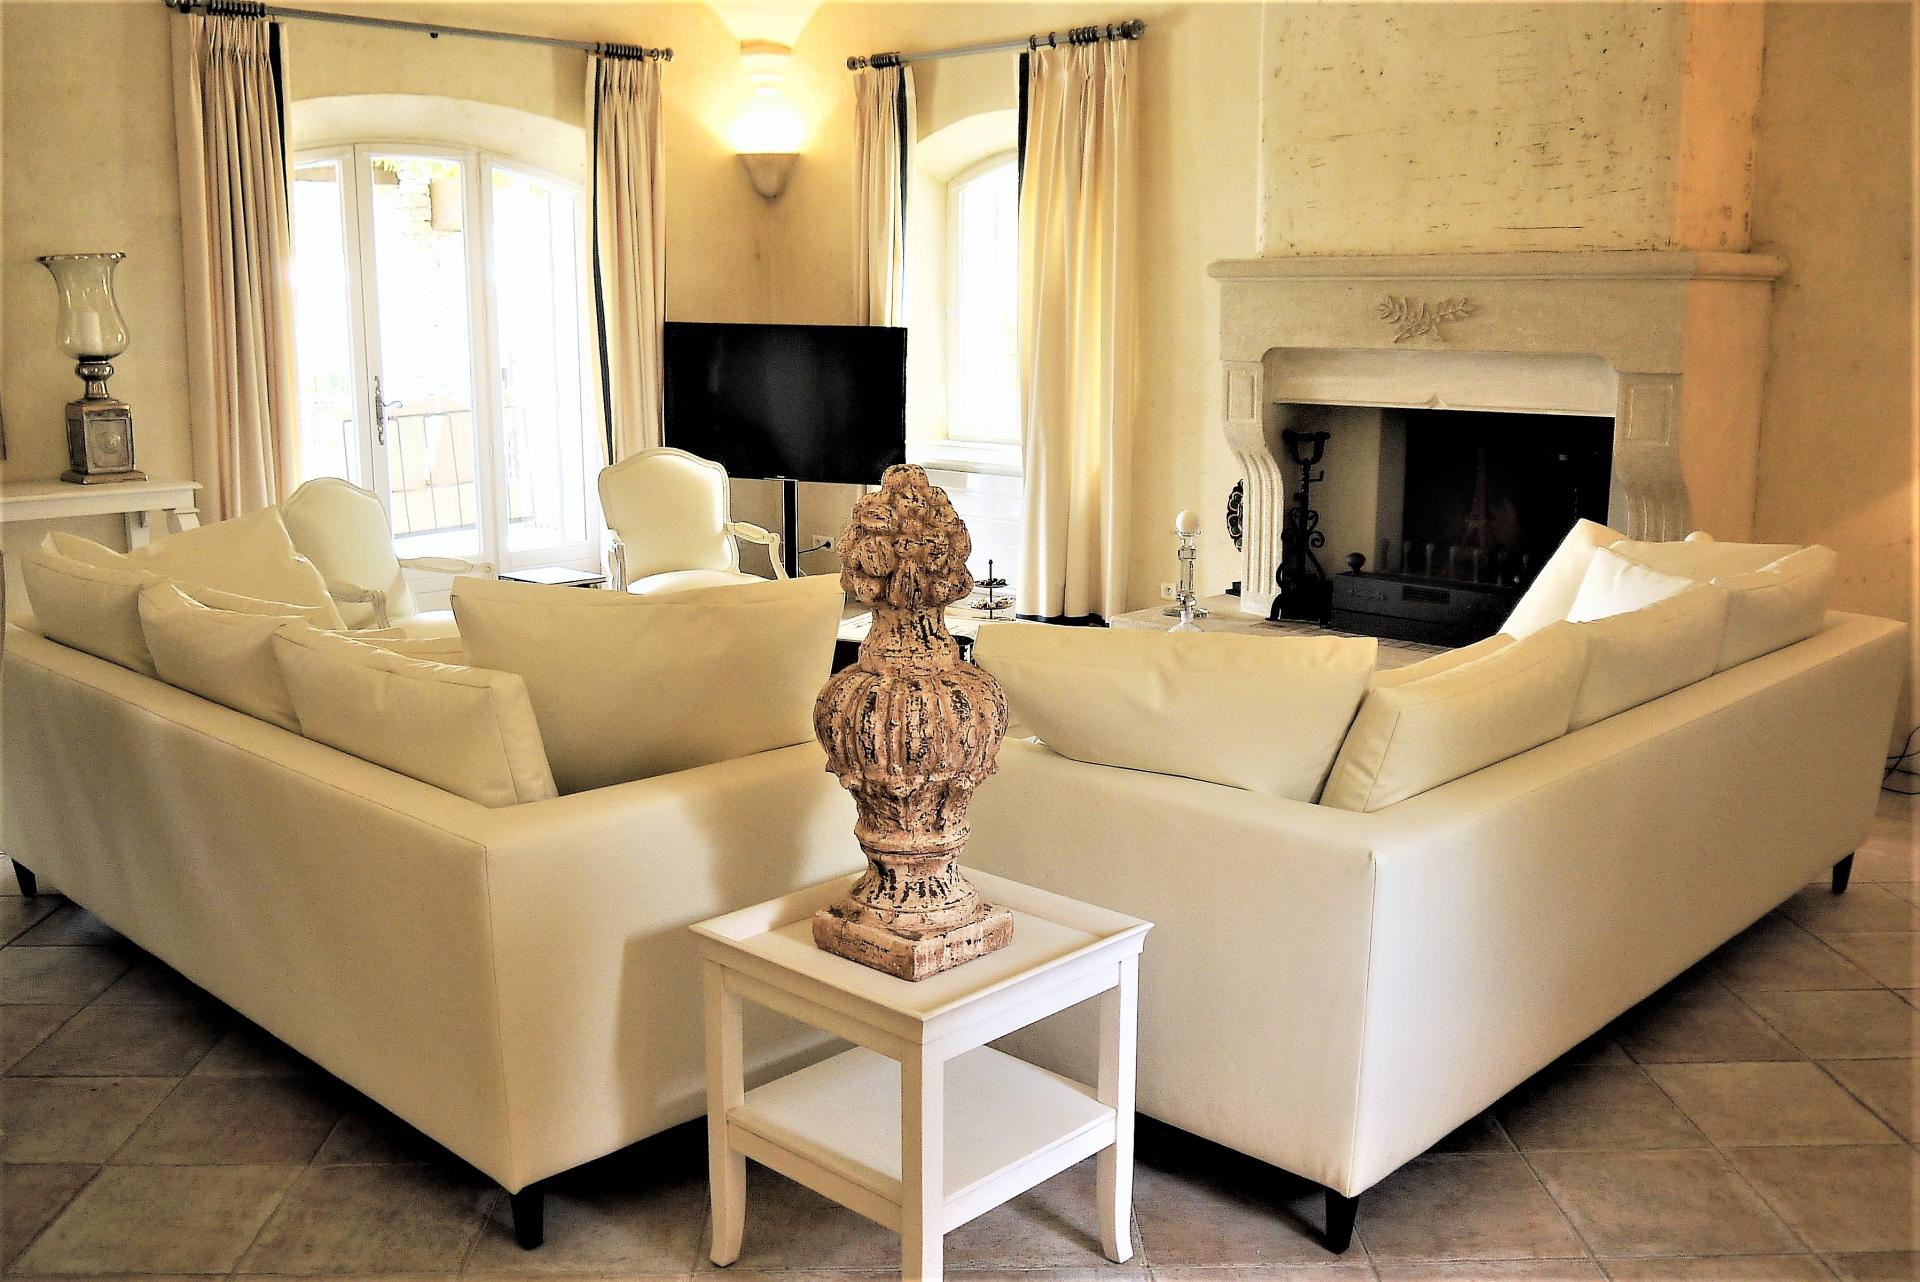 LA VILLA ANGELE HOLIDAY RENTAL IN LUBERON PROVENCE AND ITS LIVING ROOM